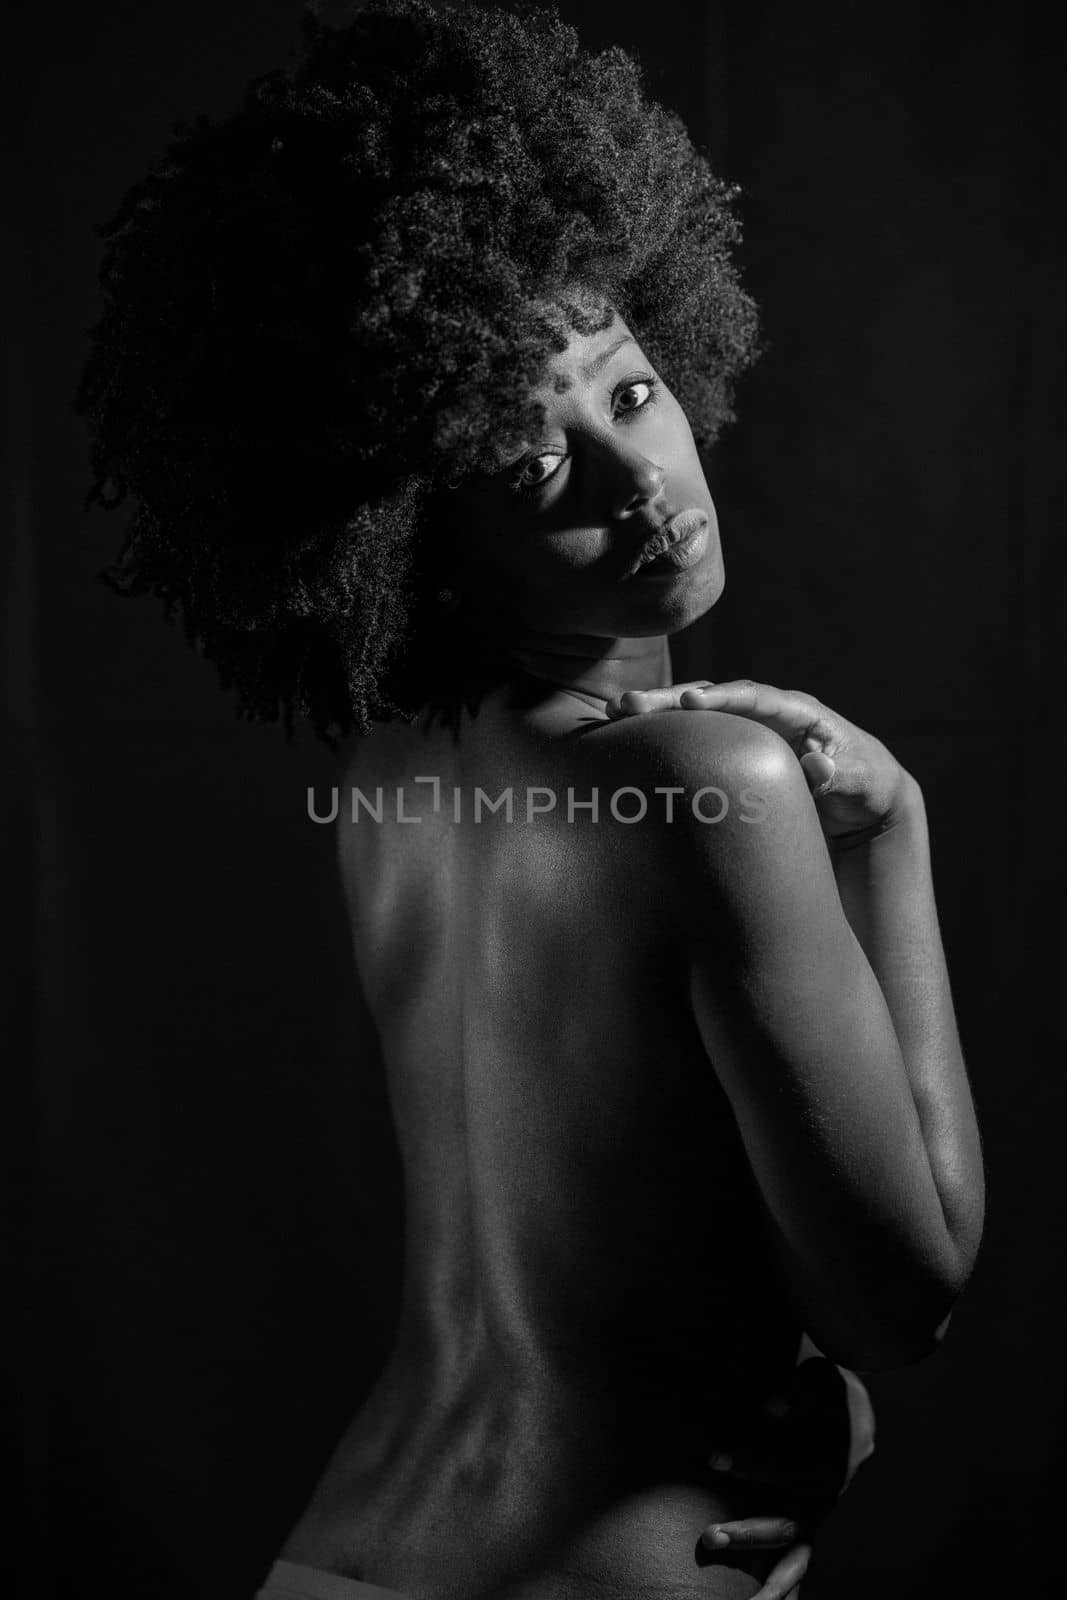 Sensual nude African American female with curly hair looking away over shoulder while standing against black background. Black and white photograph.